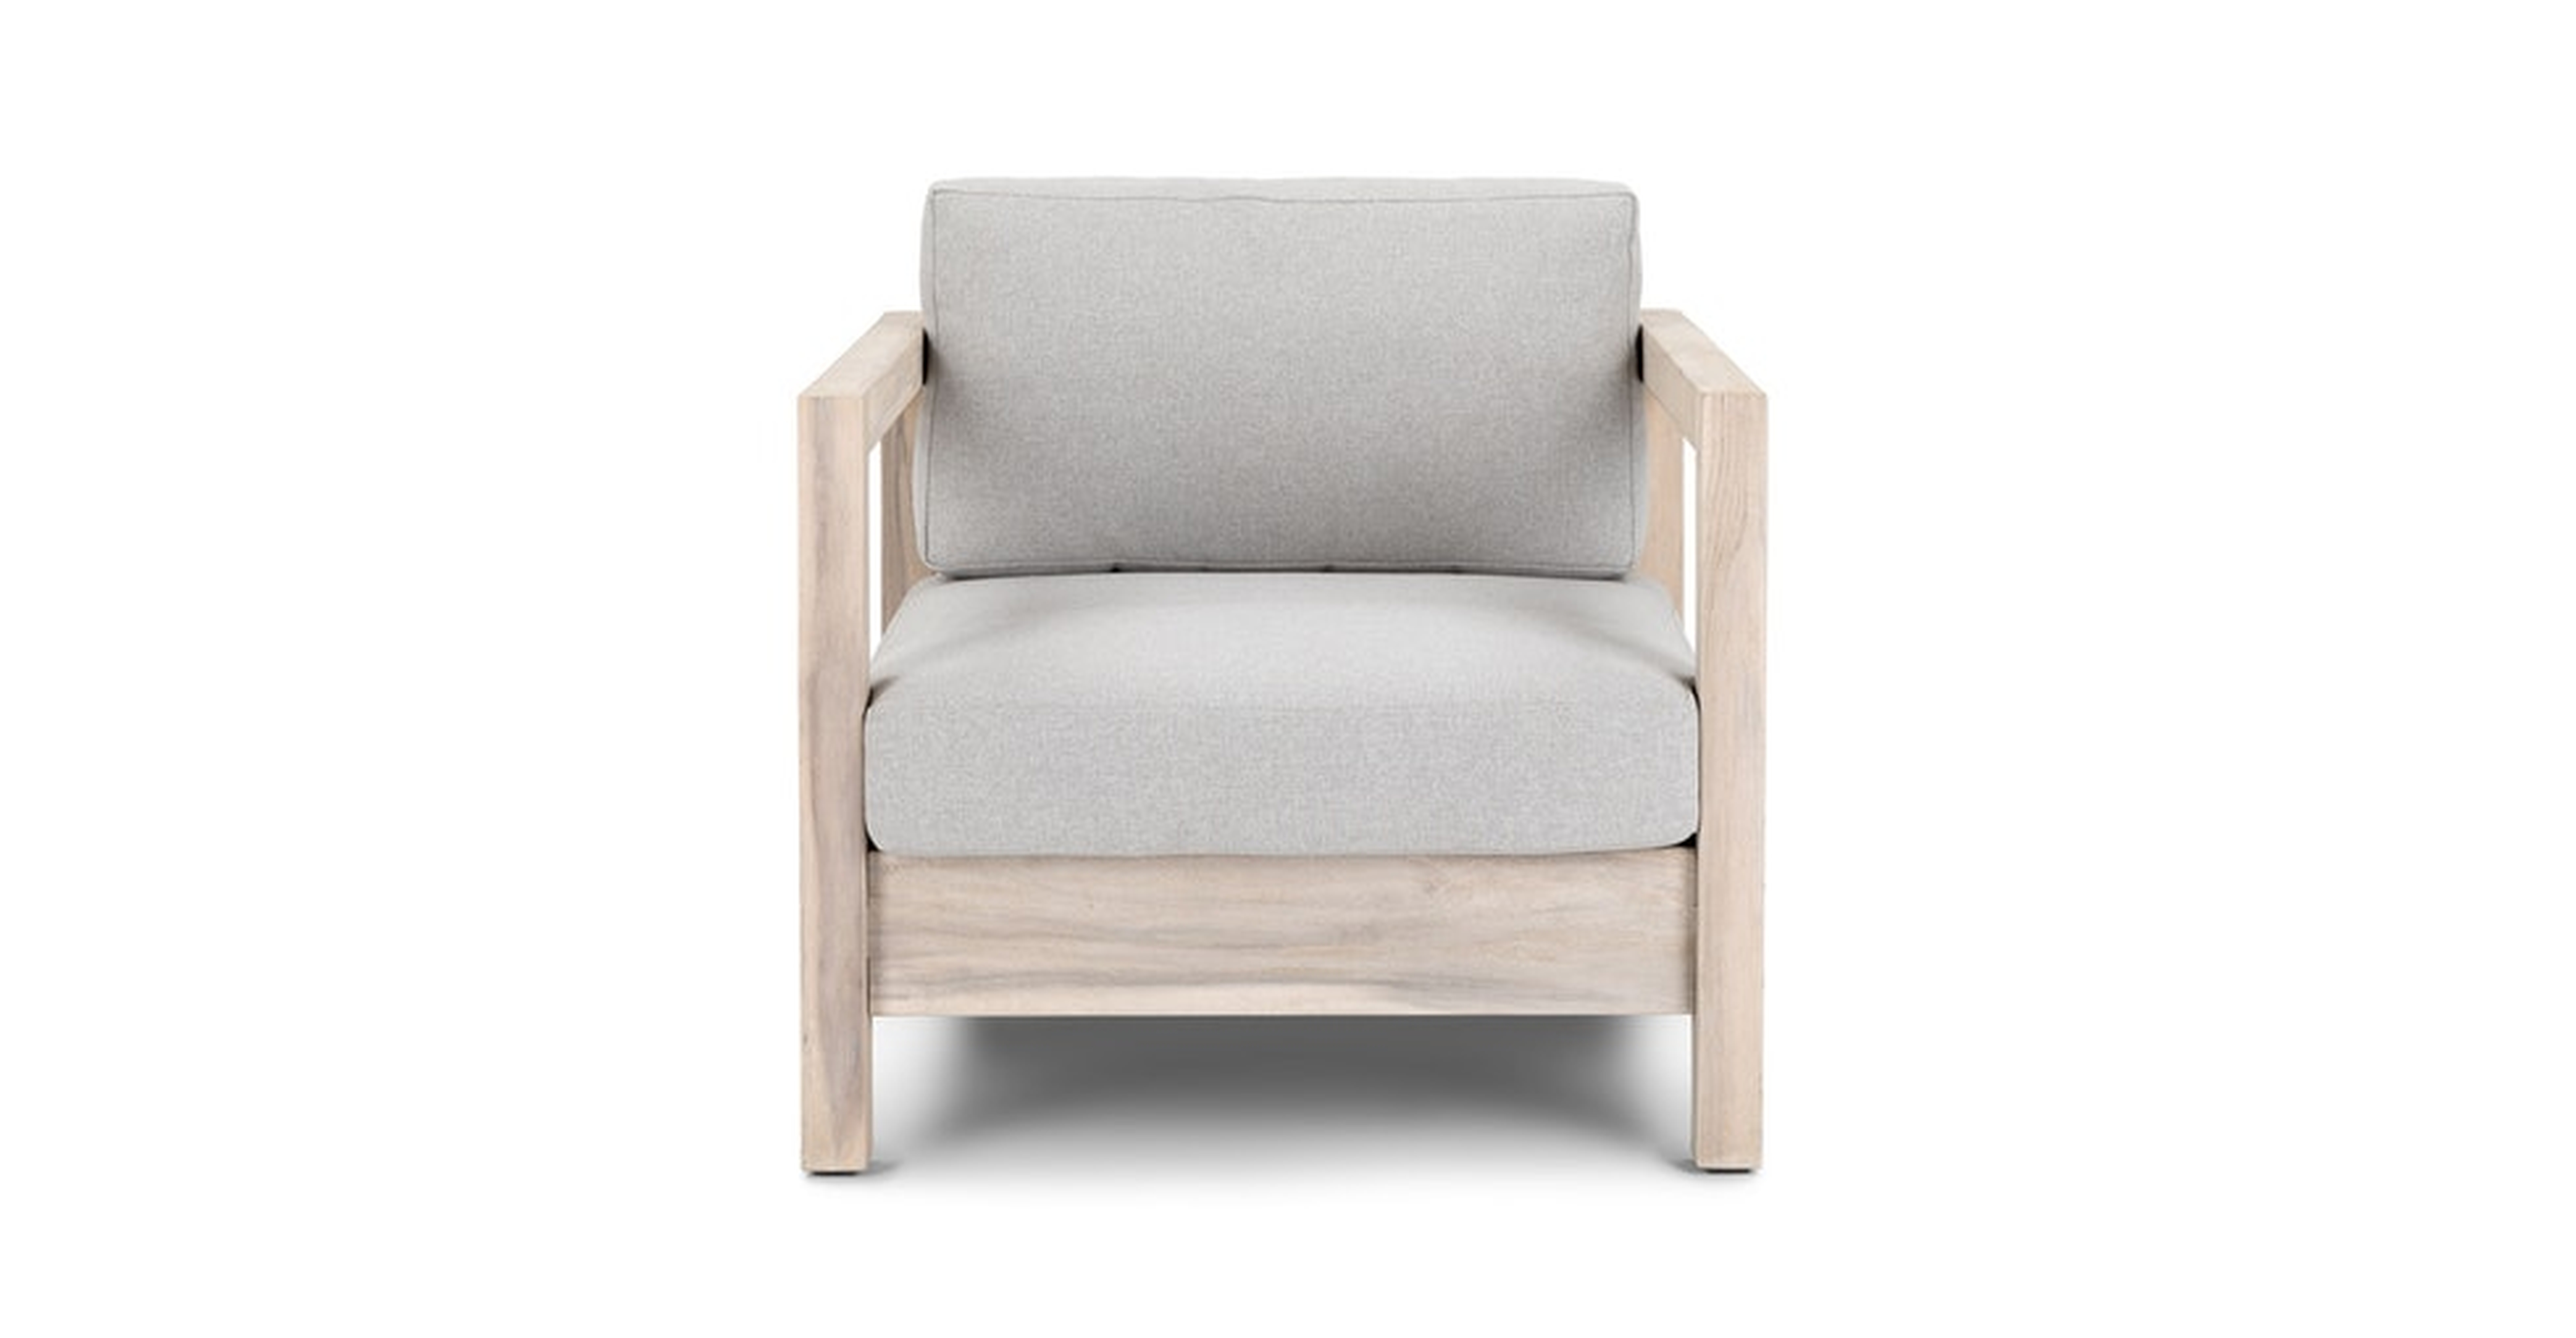 Arca Driftwood Gray Lounge Chair - Article